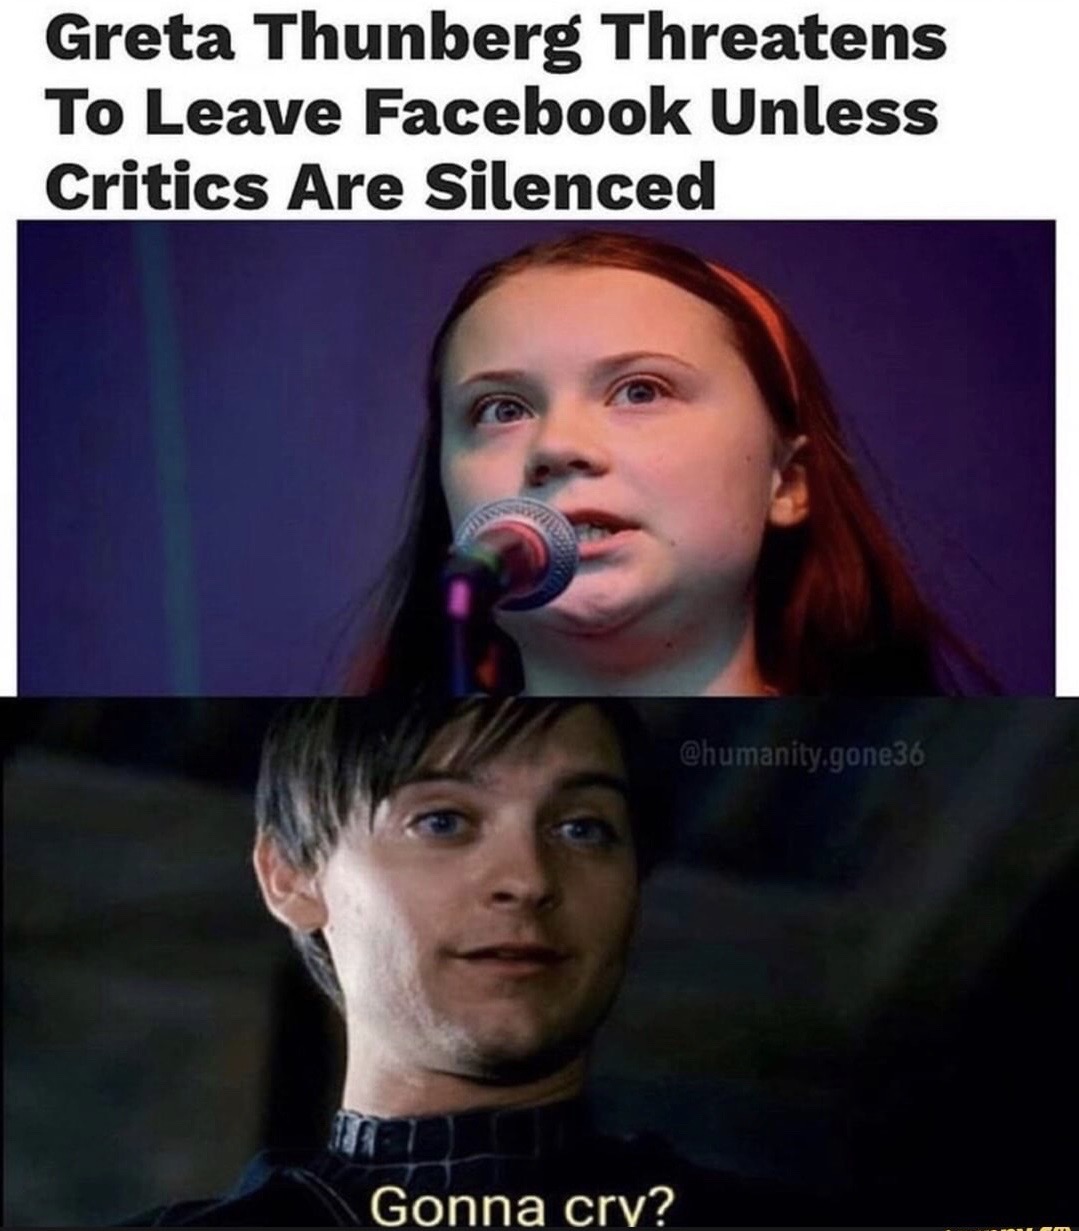 photo caption - Greta Thunberg Threatens To Leave Facebook Unless Critics Are Silenced .gone36 Gonna cry?